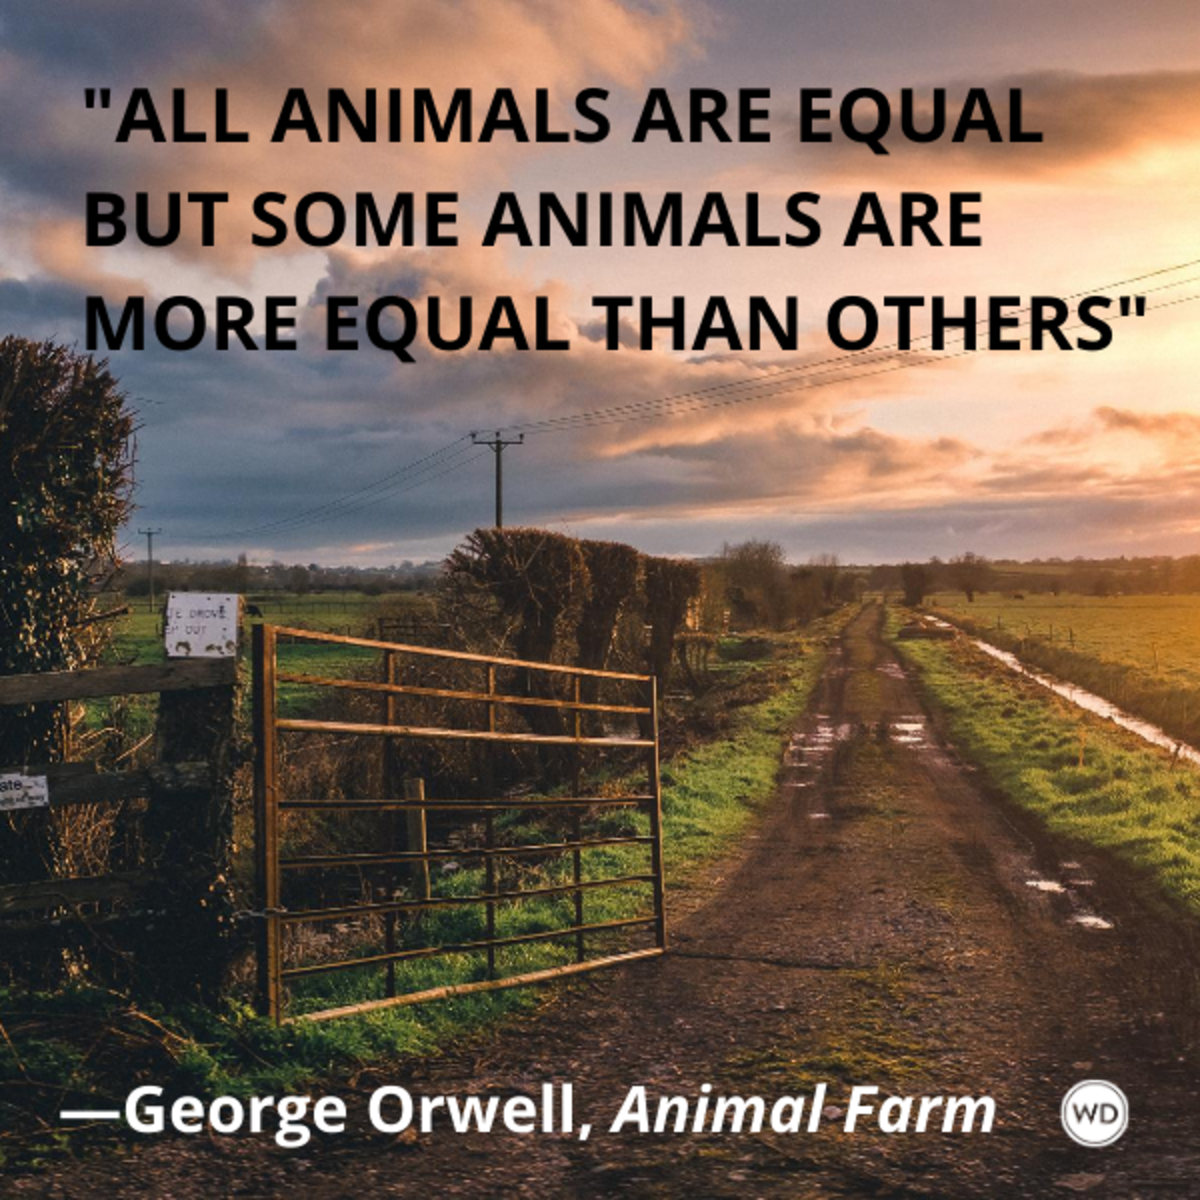 animal_farm_by_george_orwell_quotes_all_animals_are_equal_but_some_animals_are_more_equal_than_others